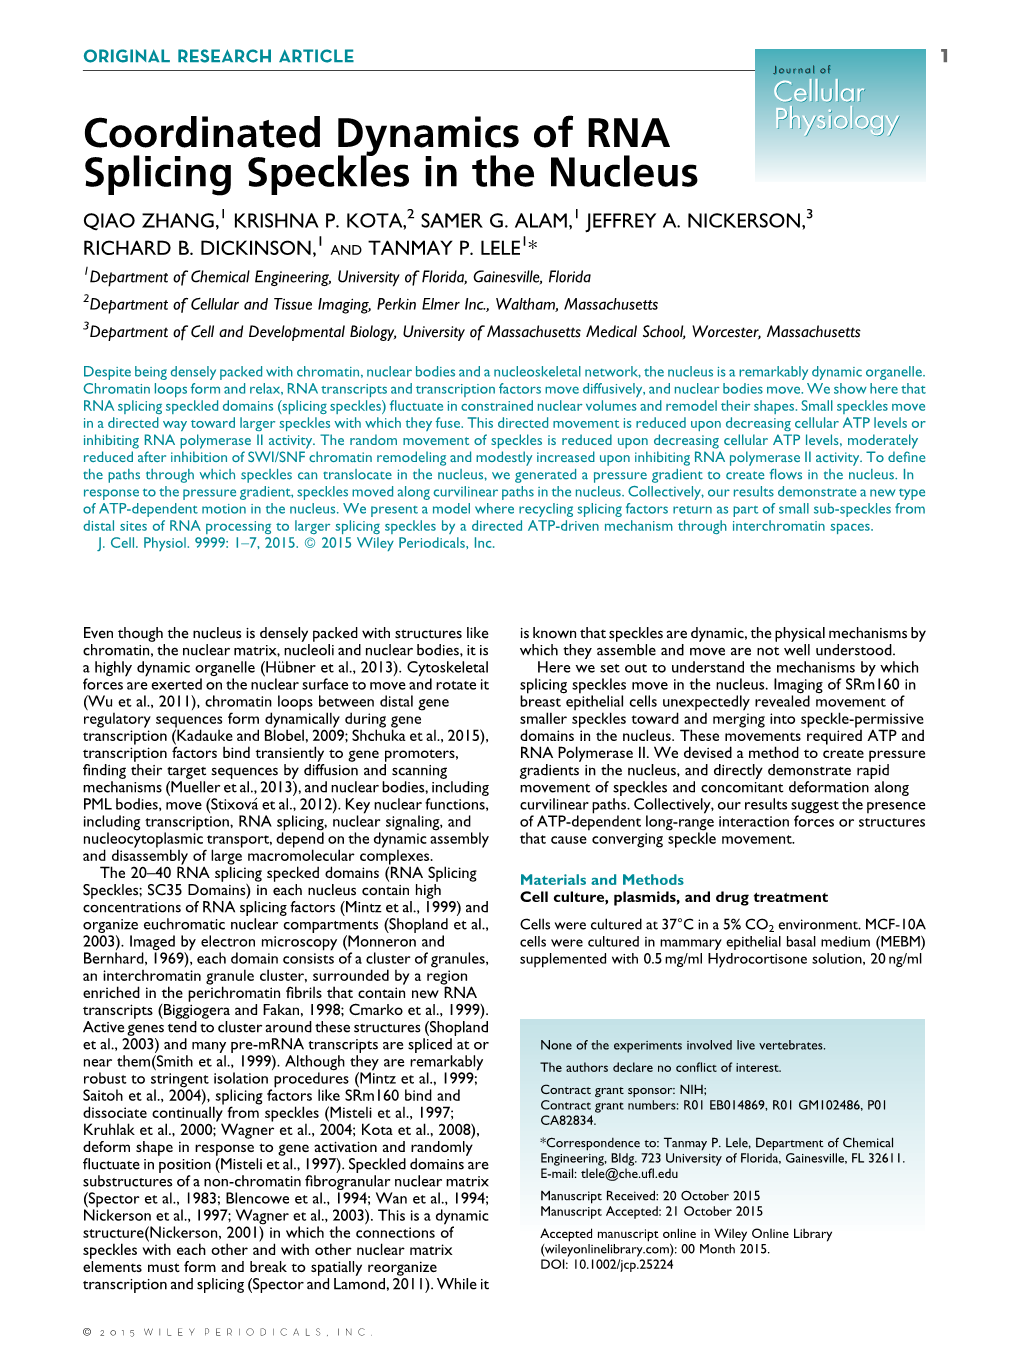 Coordinated Dynamics of RNA Splicing Speckles in the Nucleus